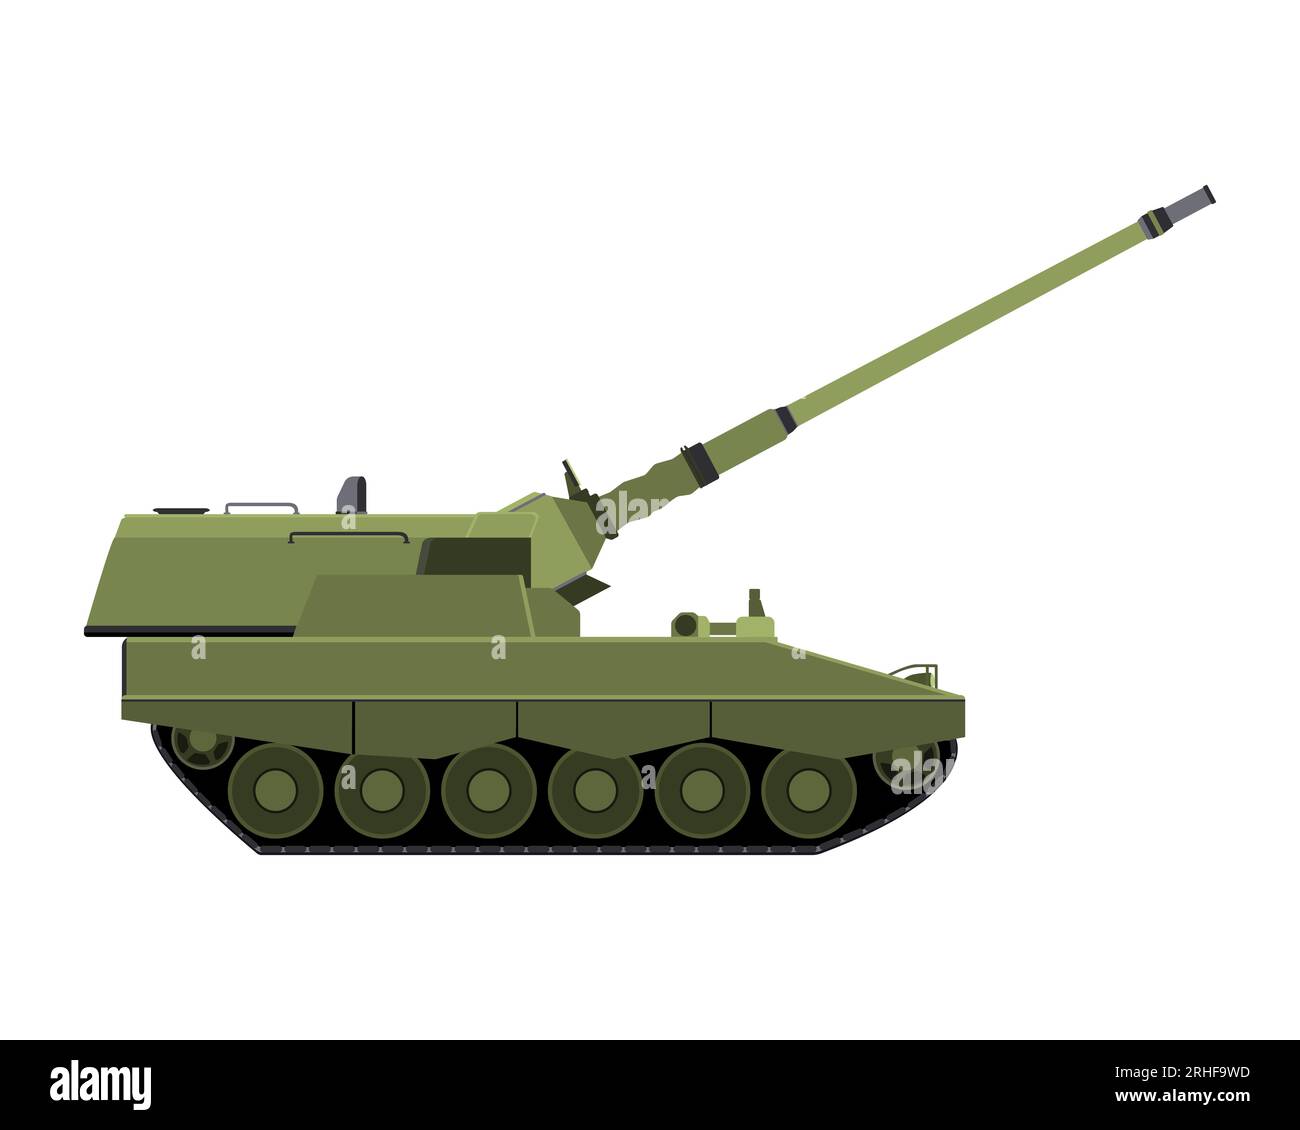 Self-propelled howitzer in flat style. Raised barrel. Military armored vehicle. Colorful vector illustration isolated on white background. Stock Vector